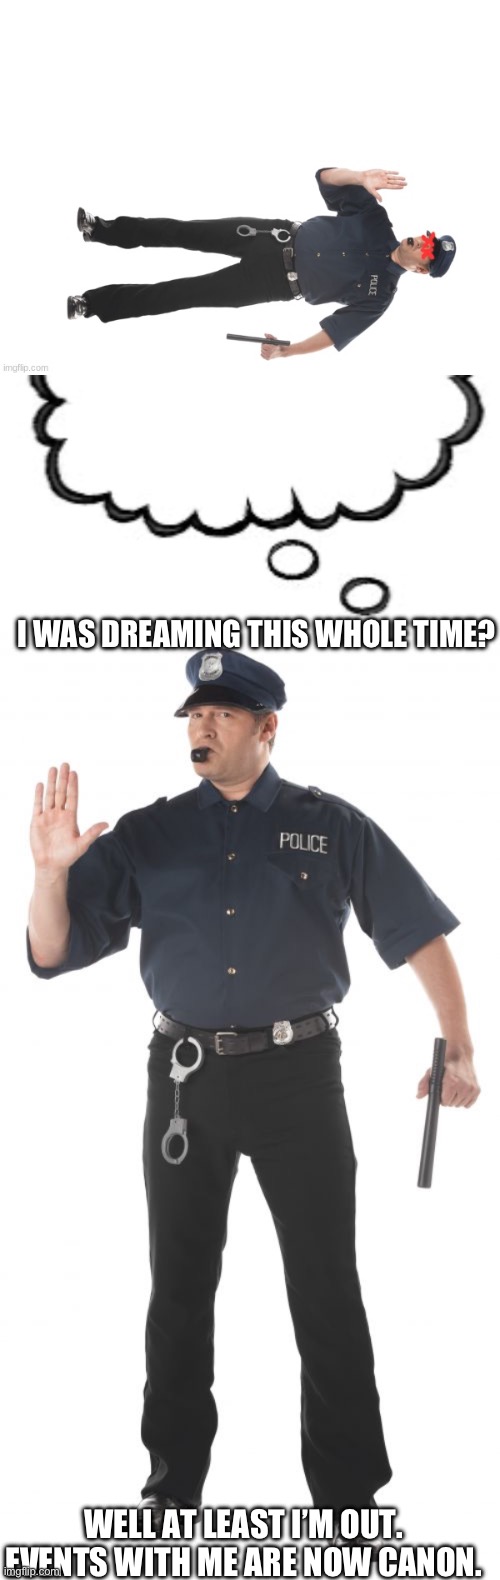 I WAS DREAMING THIS WHOLE TIME? WELL AT LEAST I’M OUT. EVENTS WITH ME ARE NOW CANON. | image tagged in think bubble,memes,stop cop | made w/ Imgflip meme maker